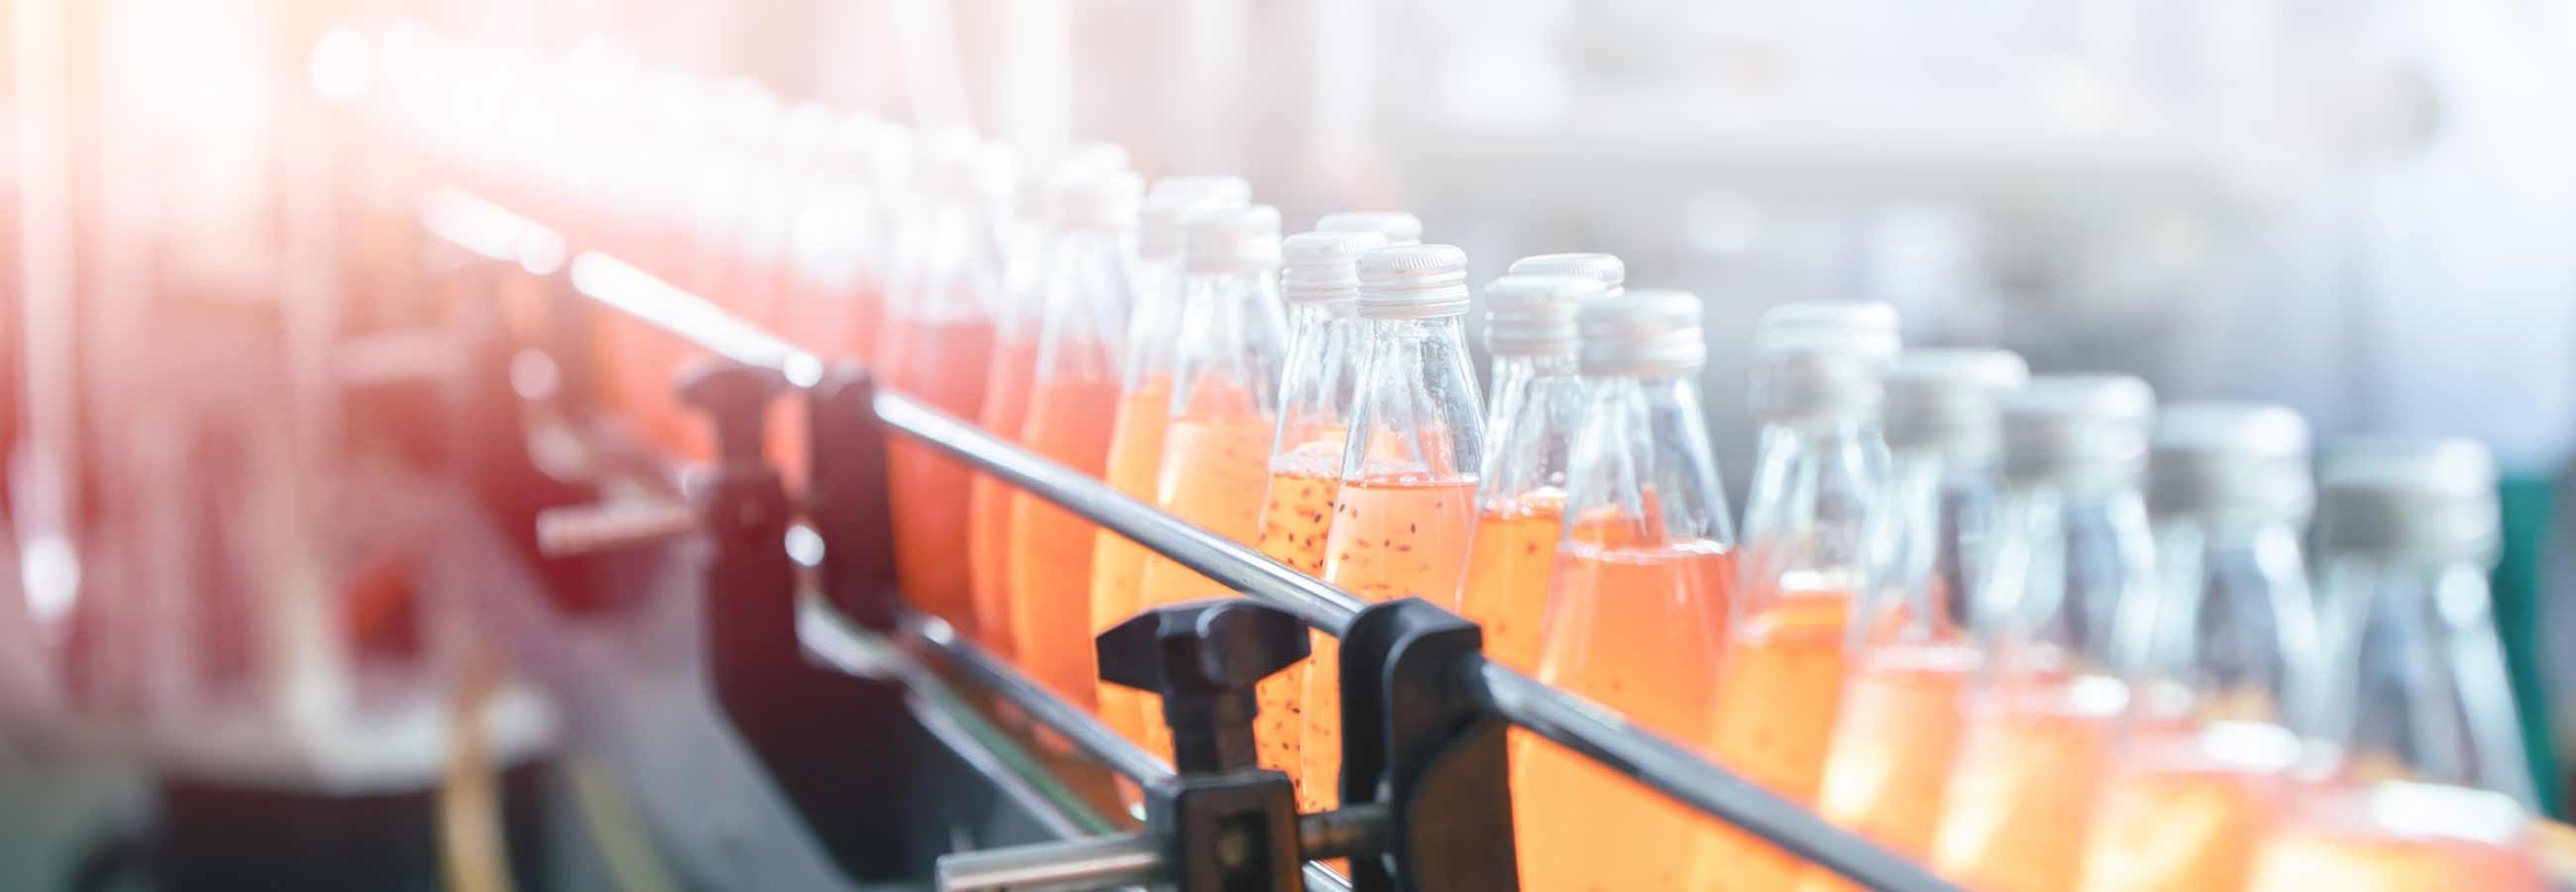 Beverage Production & Manufacturing